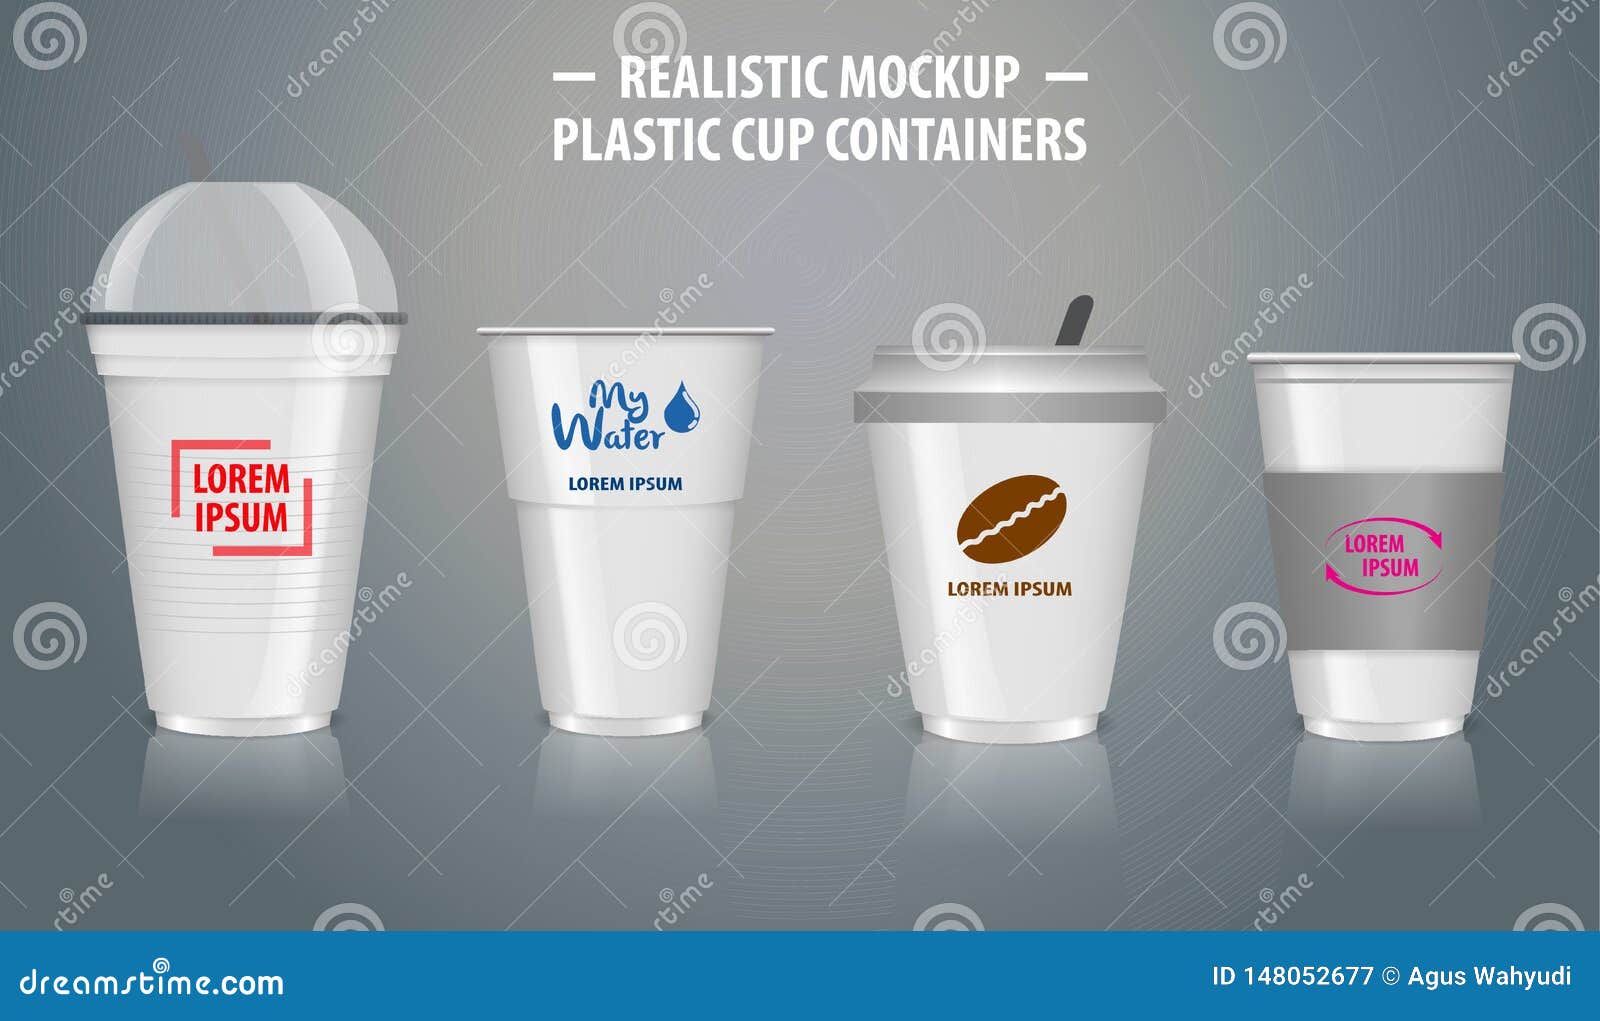 Realistic plastic coffee cup. Clear plastic cup mockup for coffee